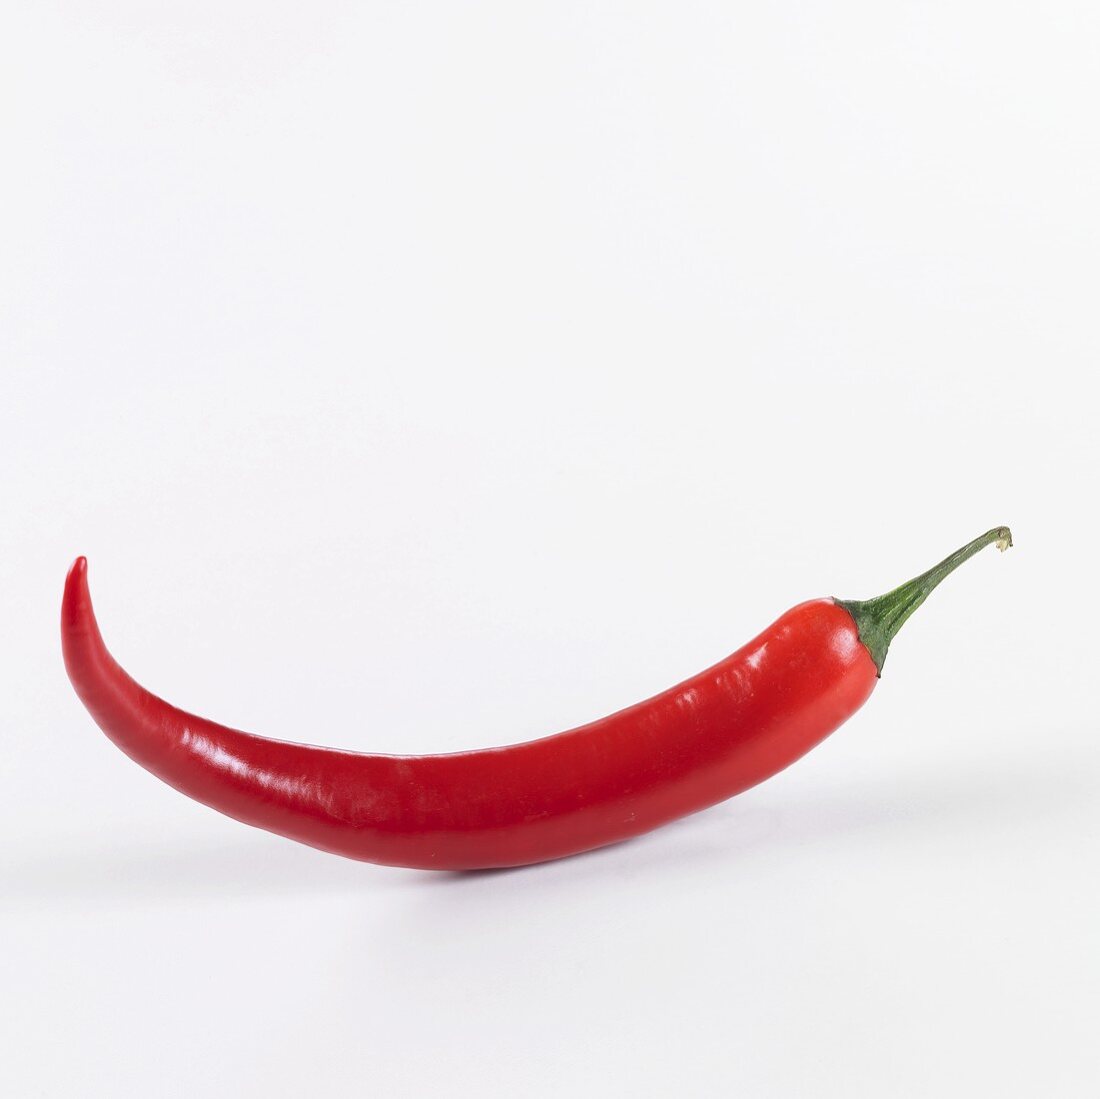 A red chilli against a white background